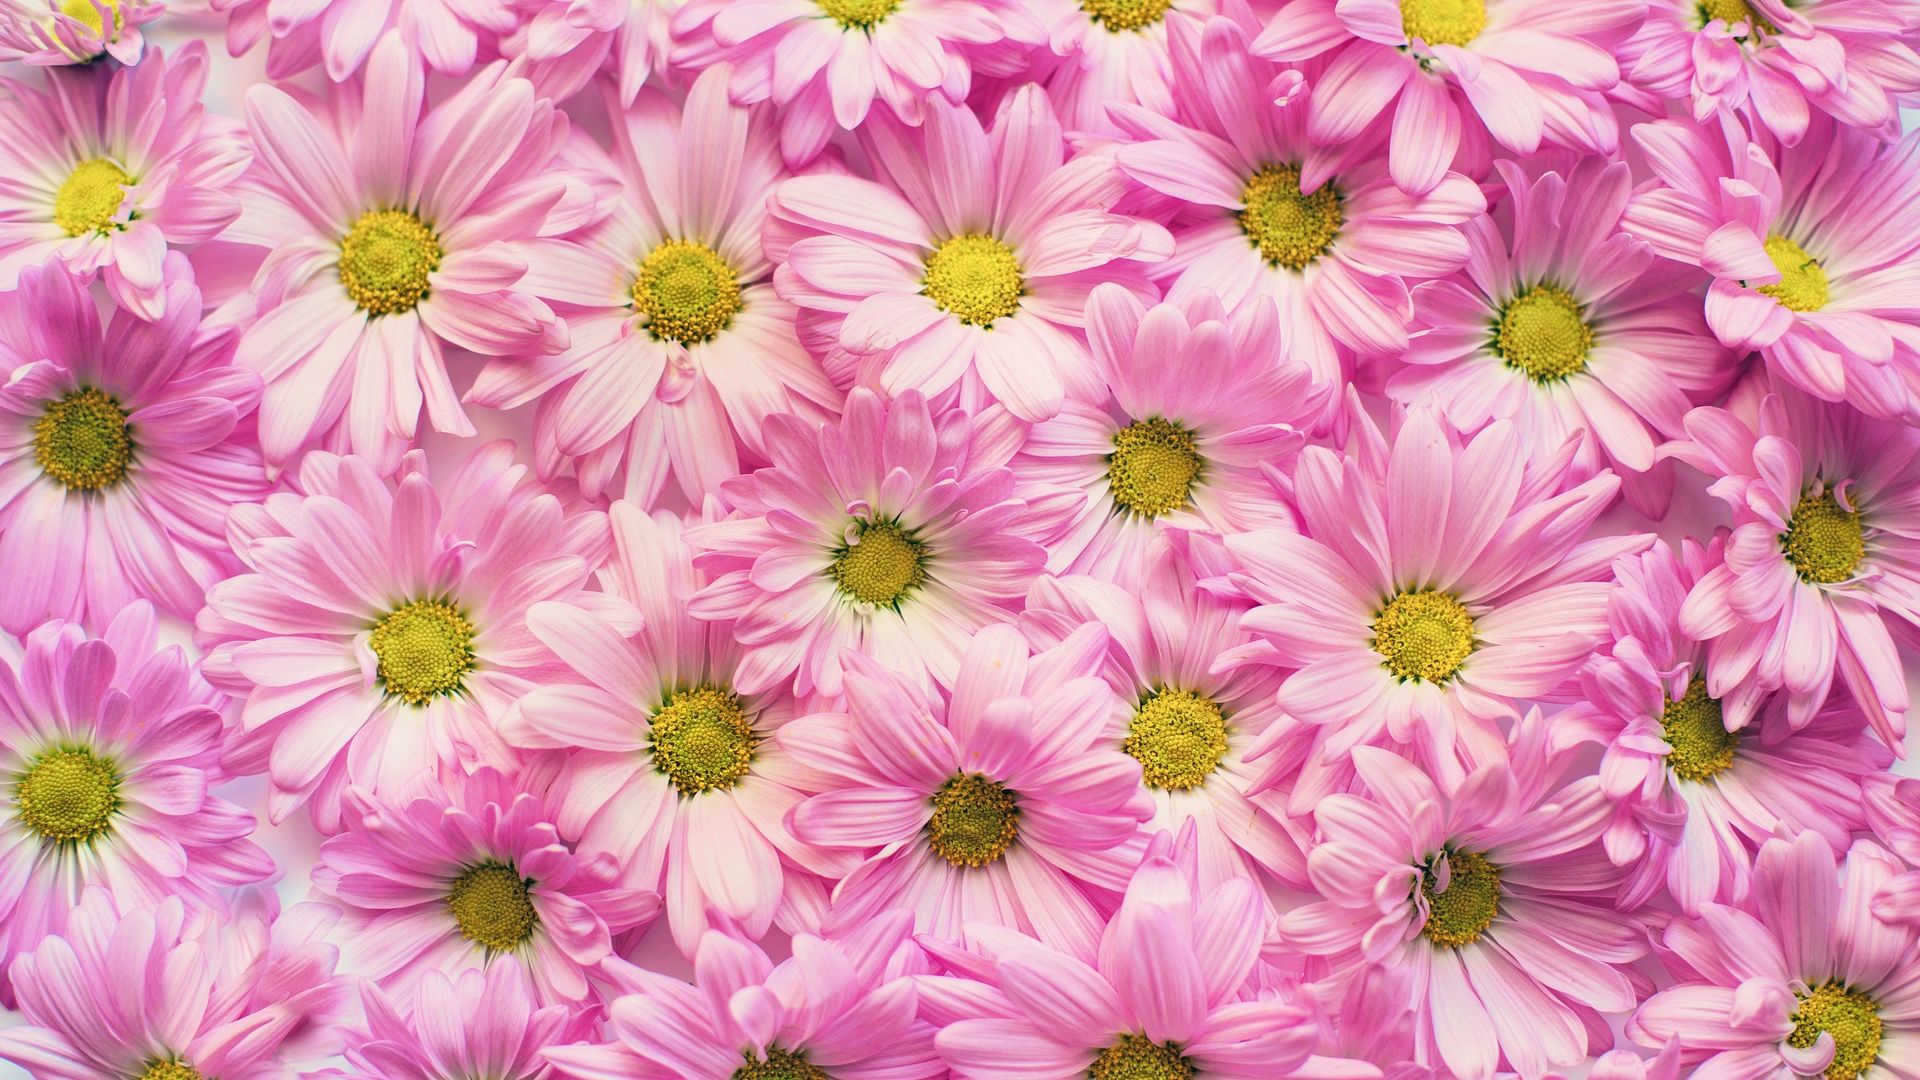 Wallpaper Daisies flowers, pink daisy